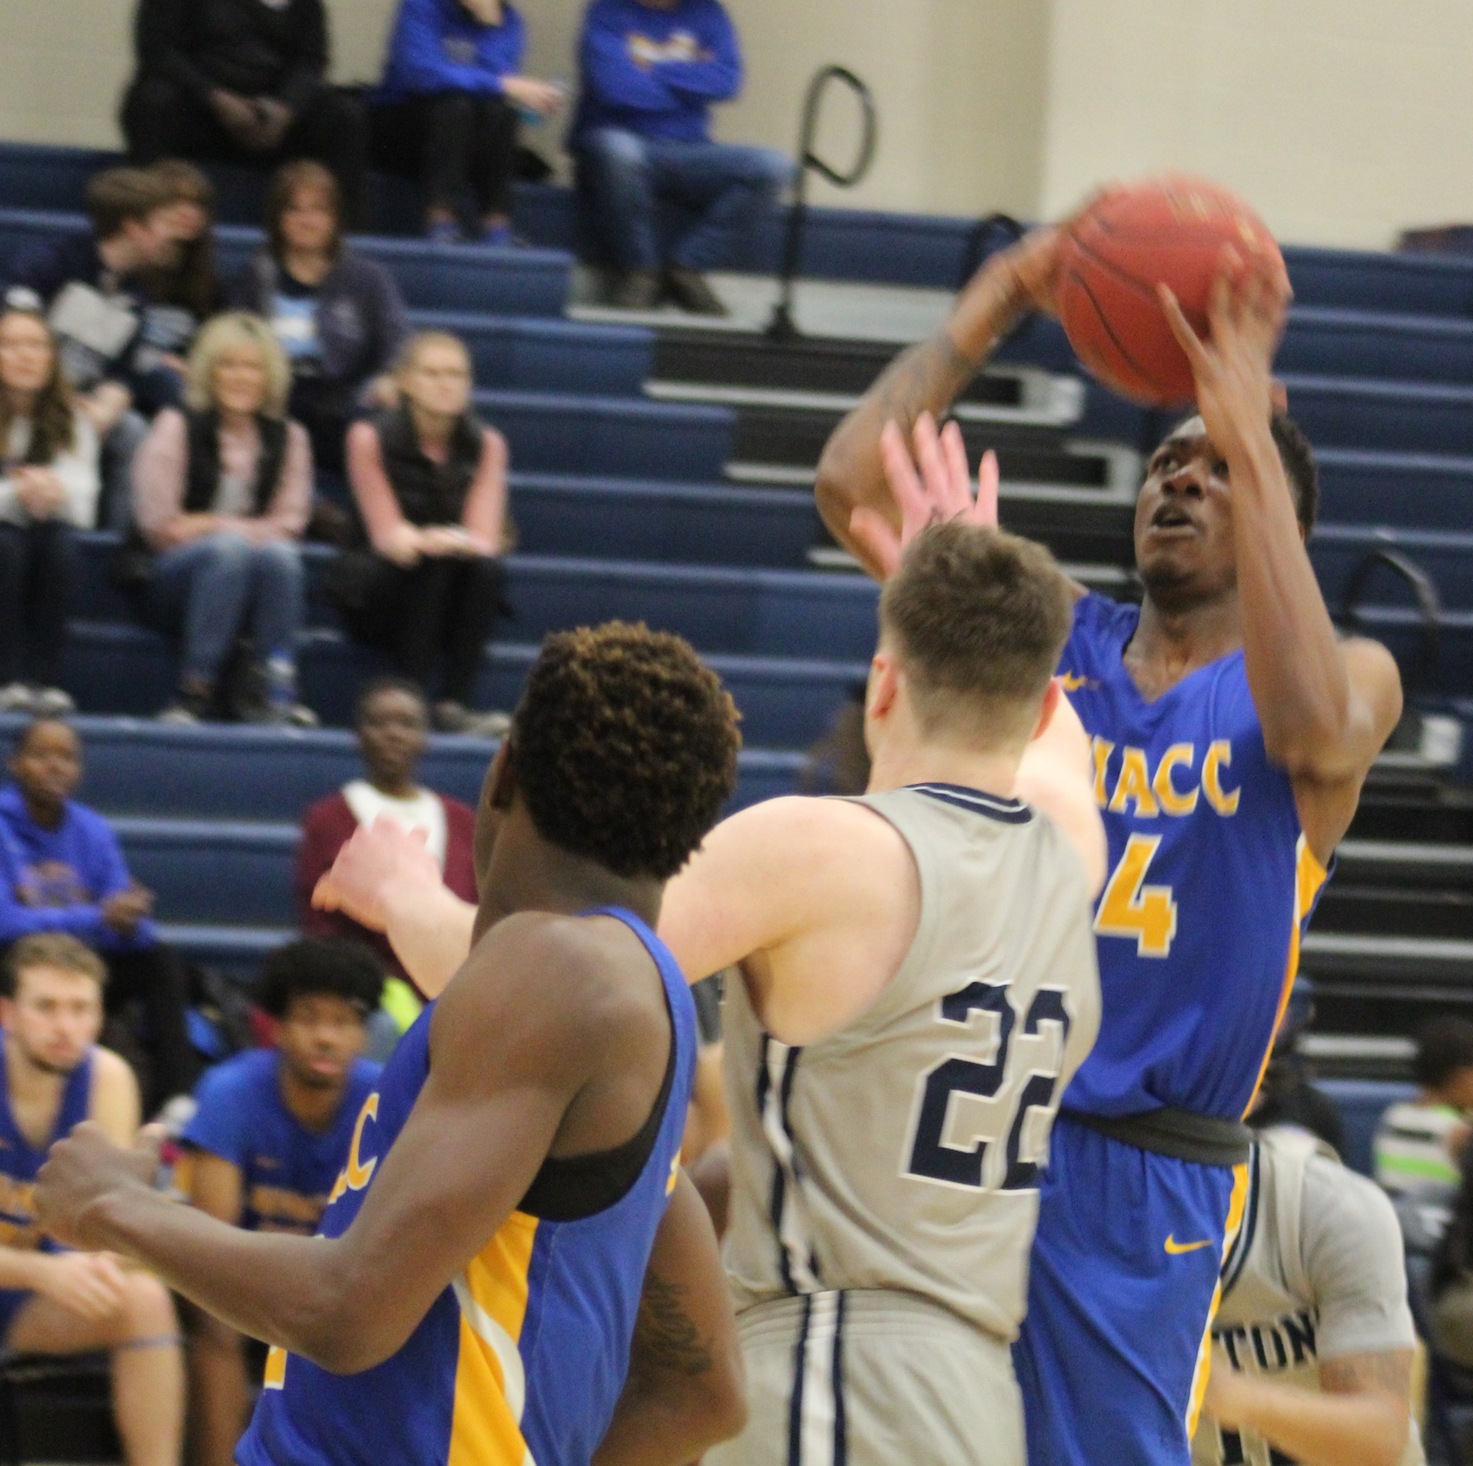 NIACC's Wendell Matthews converts a layup in Saturday's win over Iowa Central.